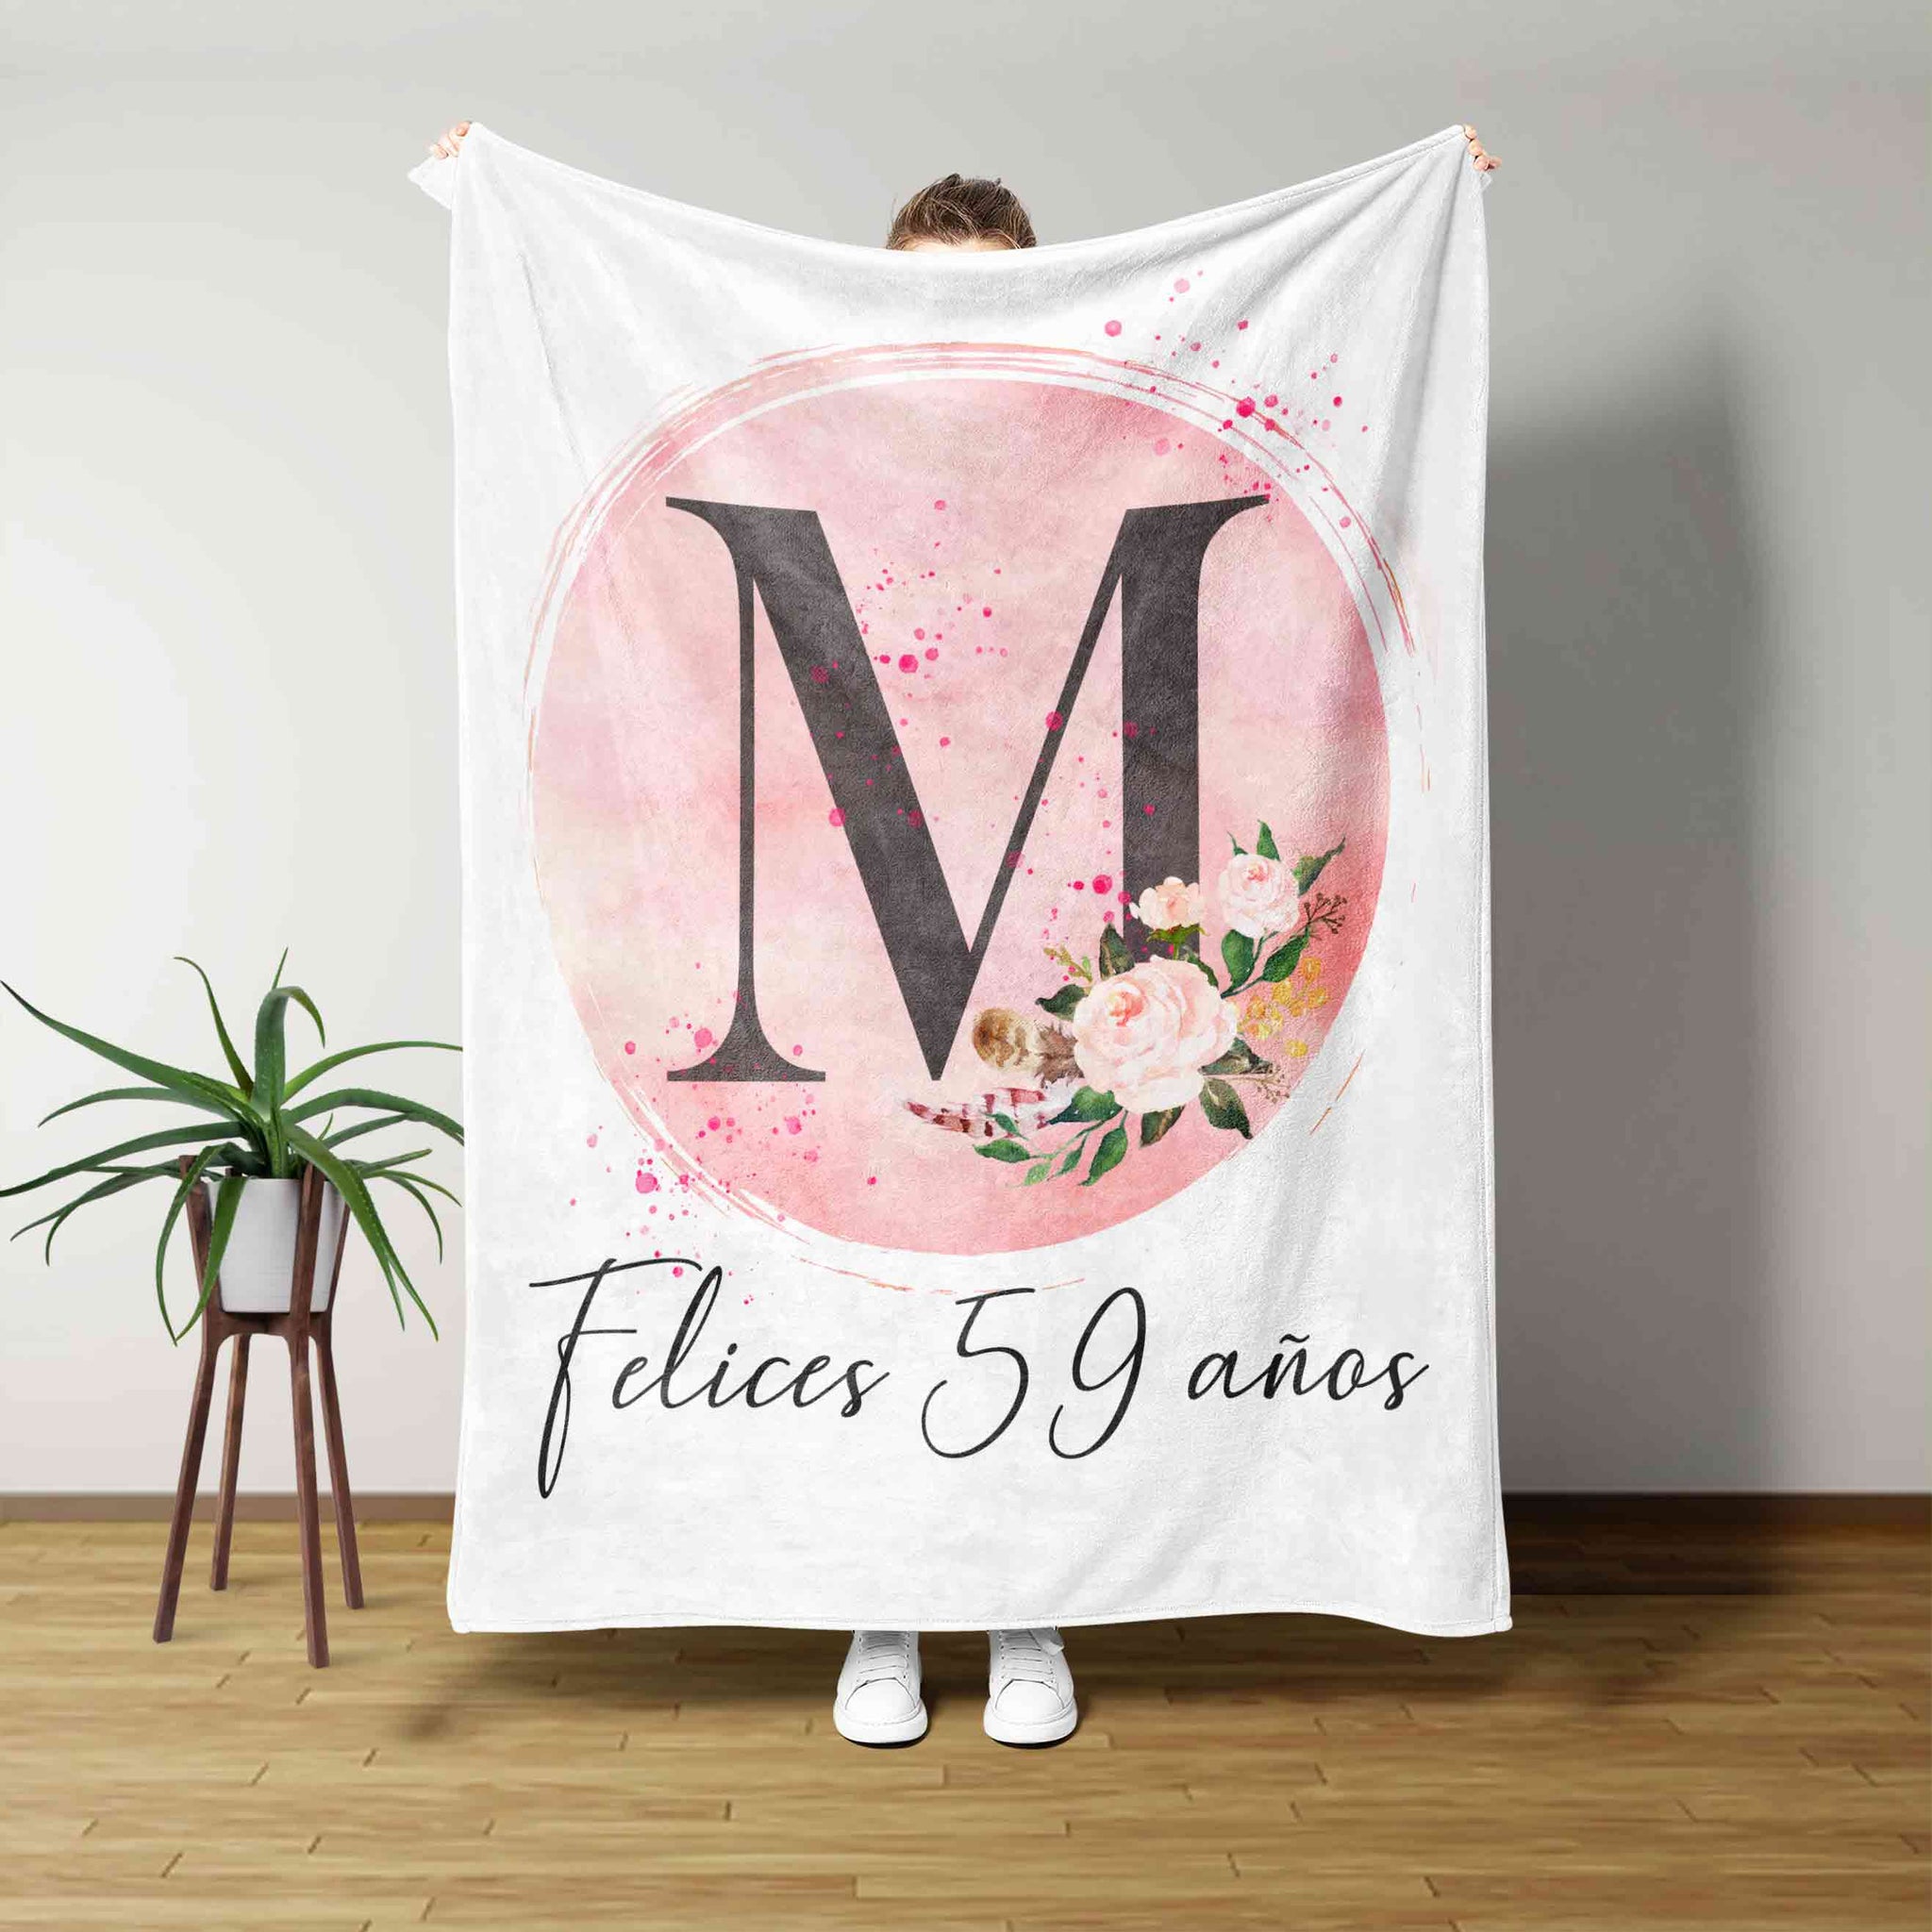 Personalized Name Blanket, Felices 59 Anos Blanket, Flower Blanket, Family Blanket, Gift Blanket